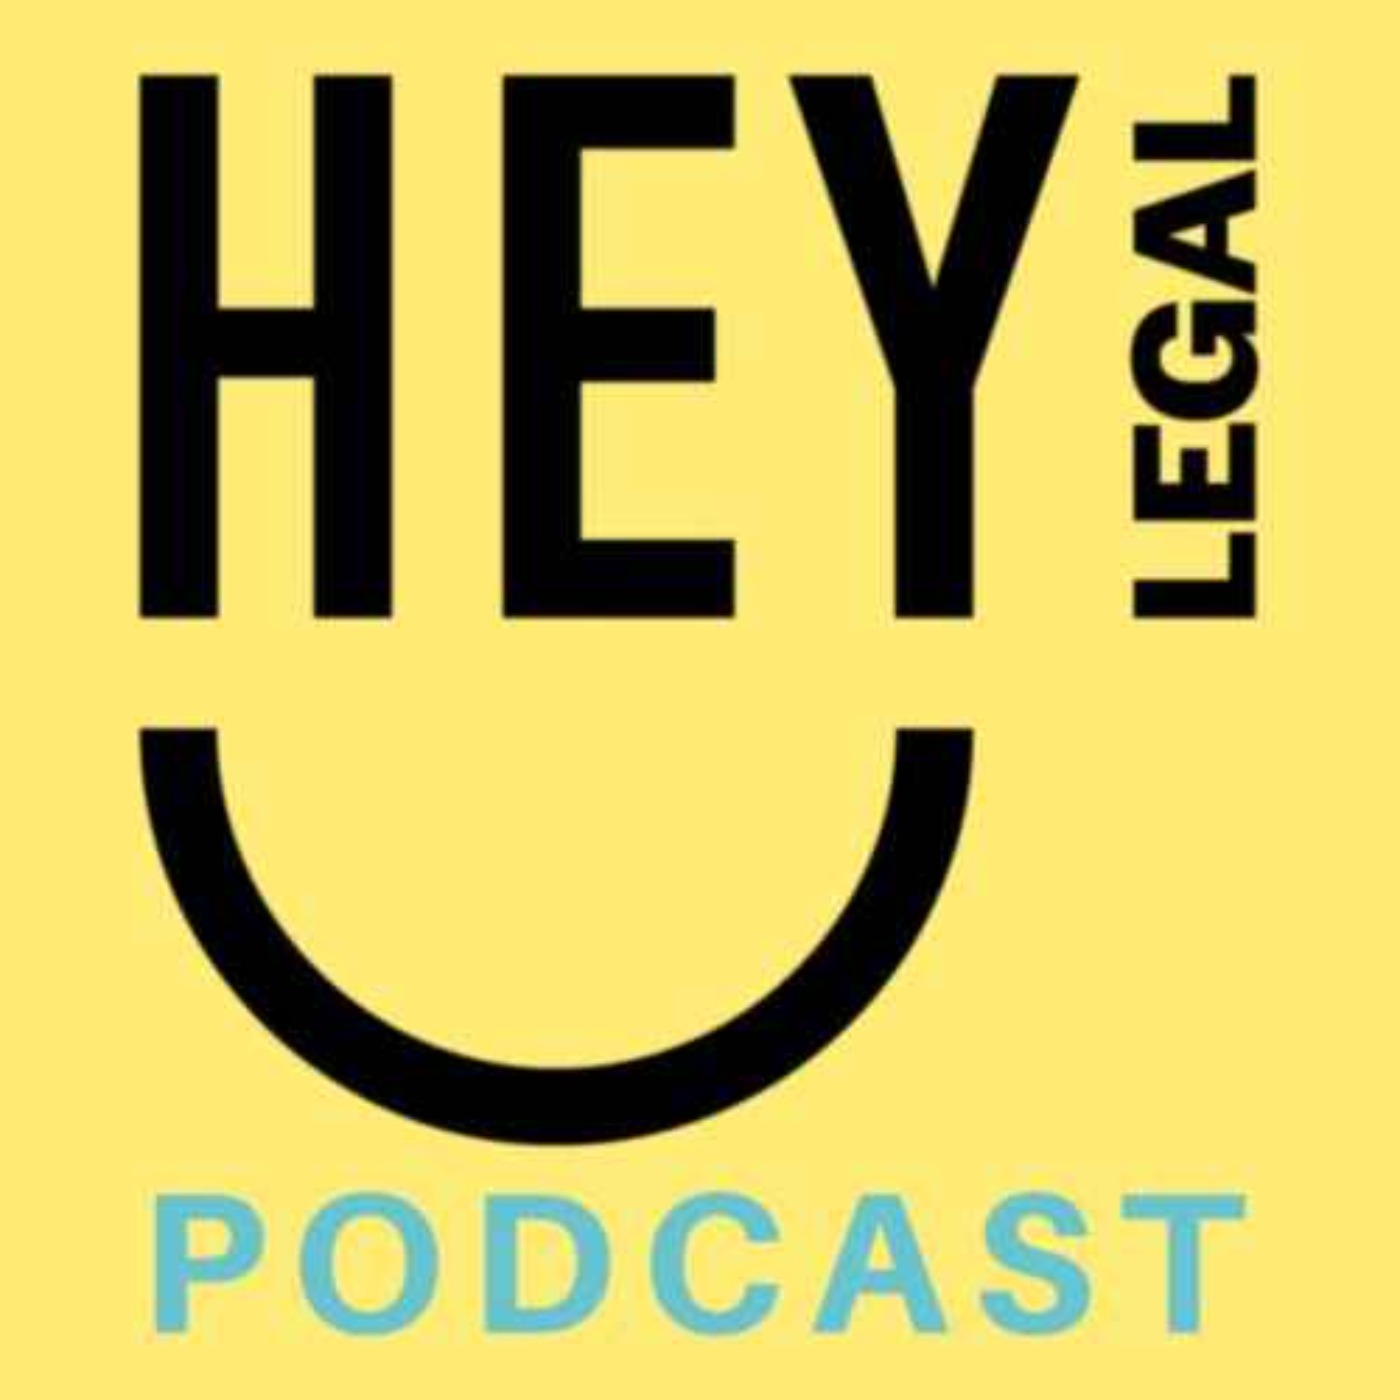 Hey Legal Podcast 30 |  Màiri McAllan - Young Women and Lawyers in Politics